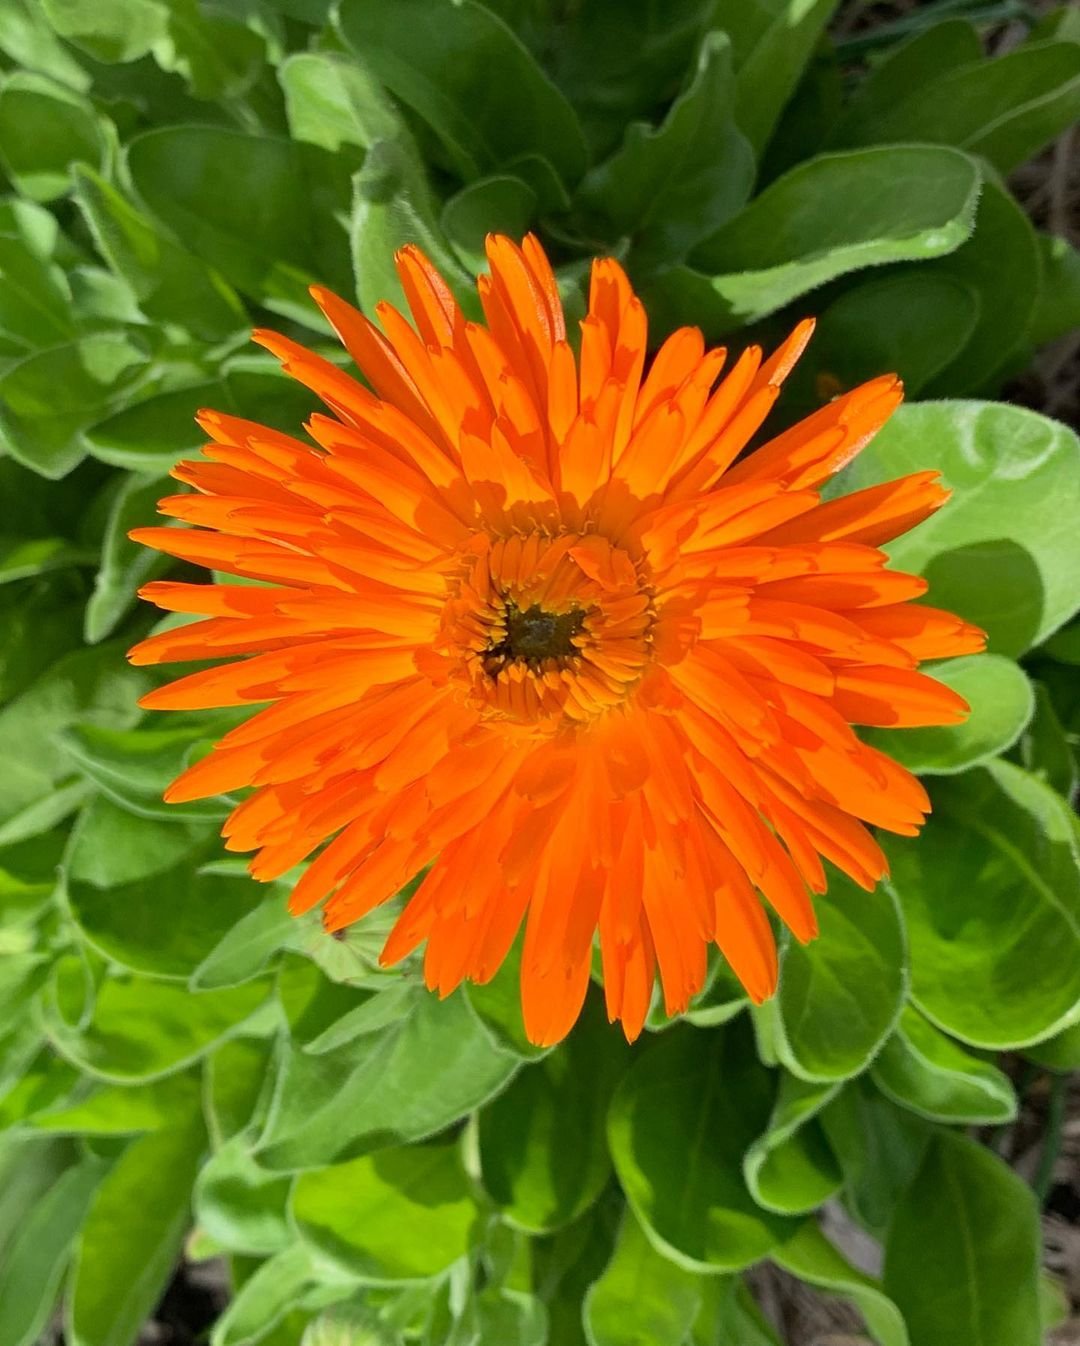  Bright orange Calendula flower (Calendula officinalis) with delicate petals and green leaves.